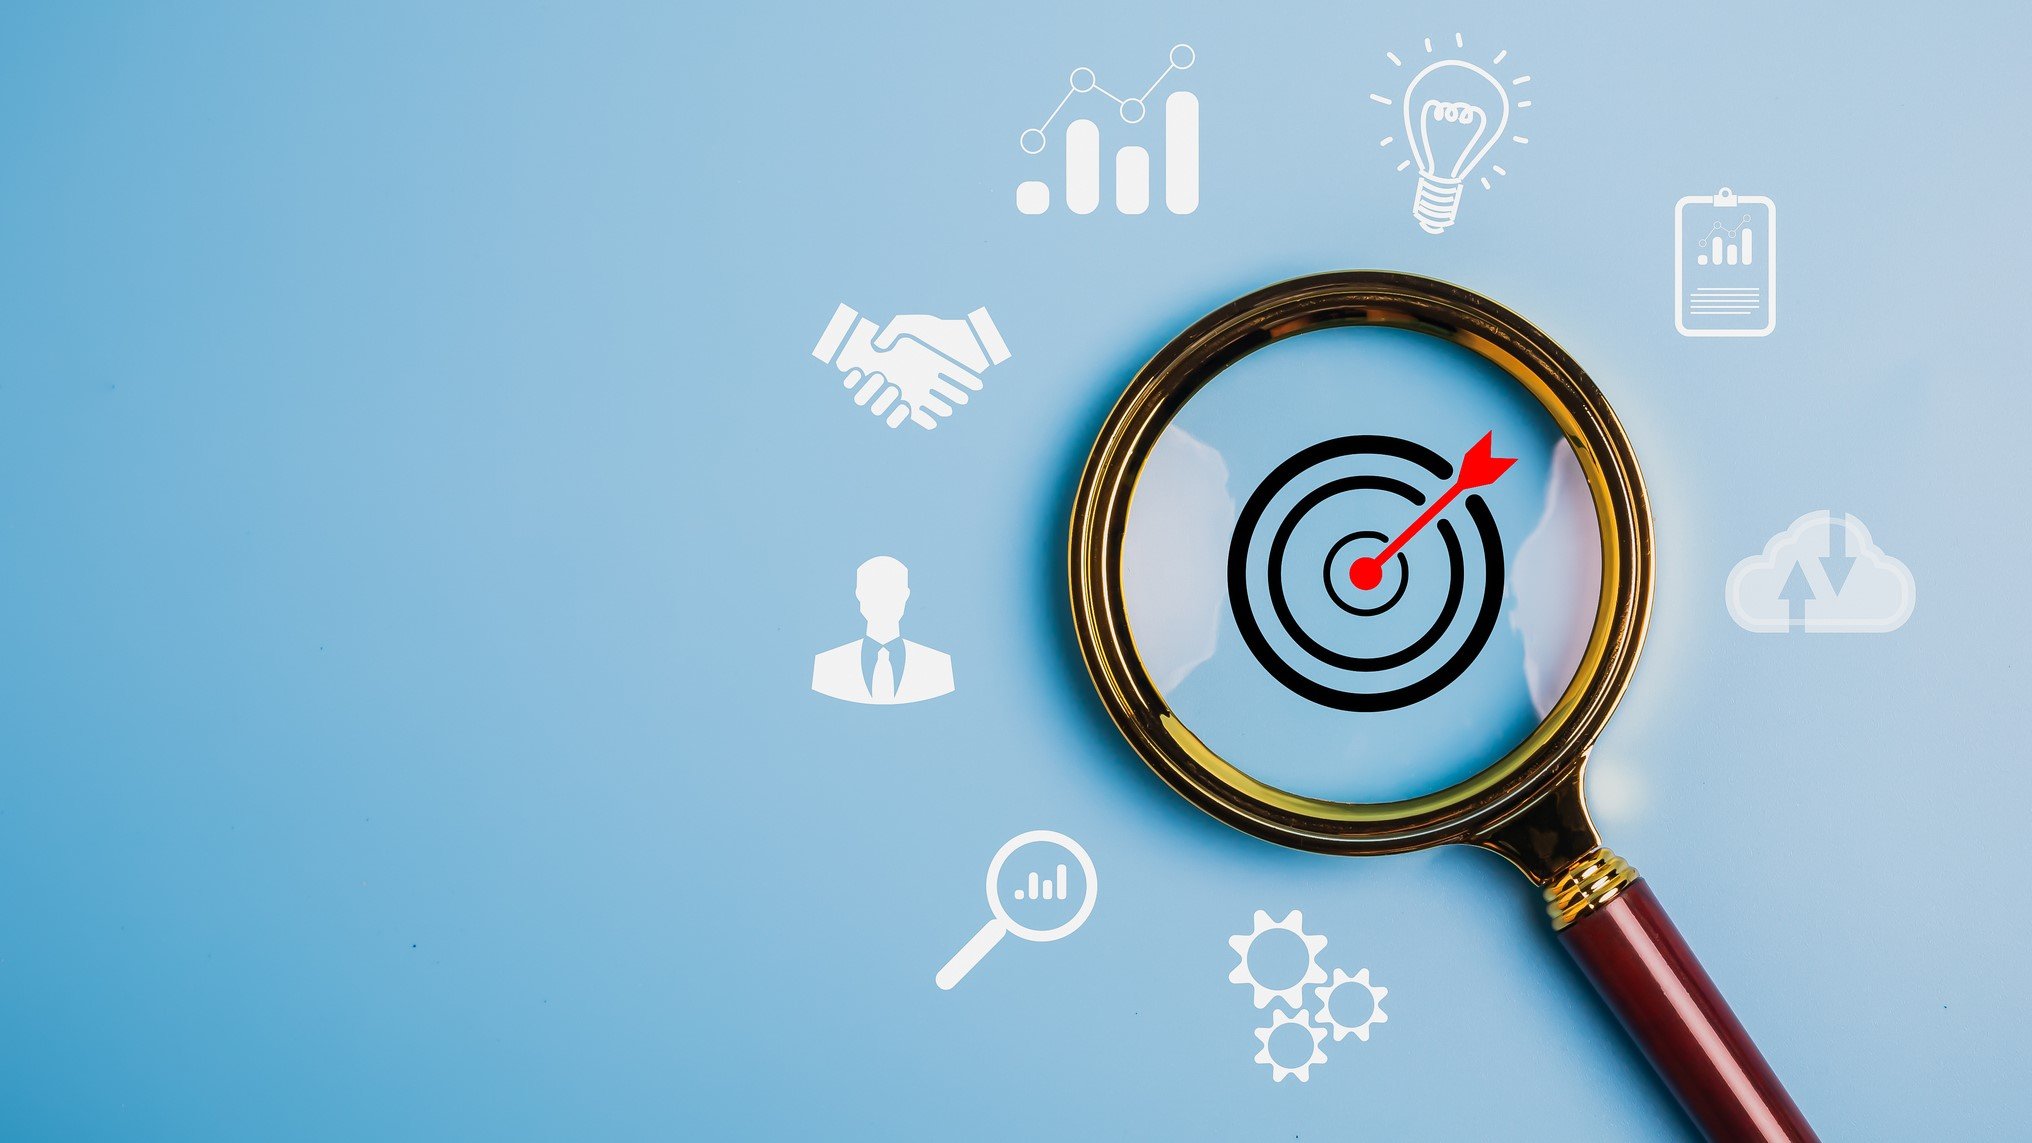 Focus magnify target strategy